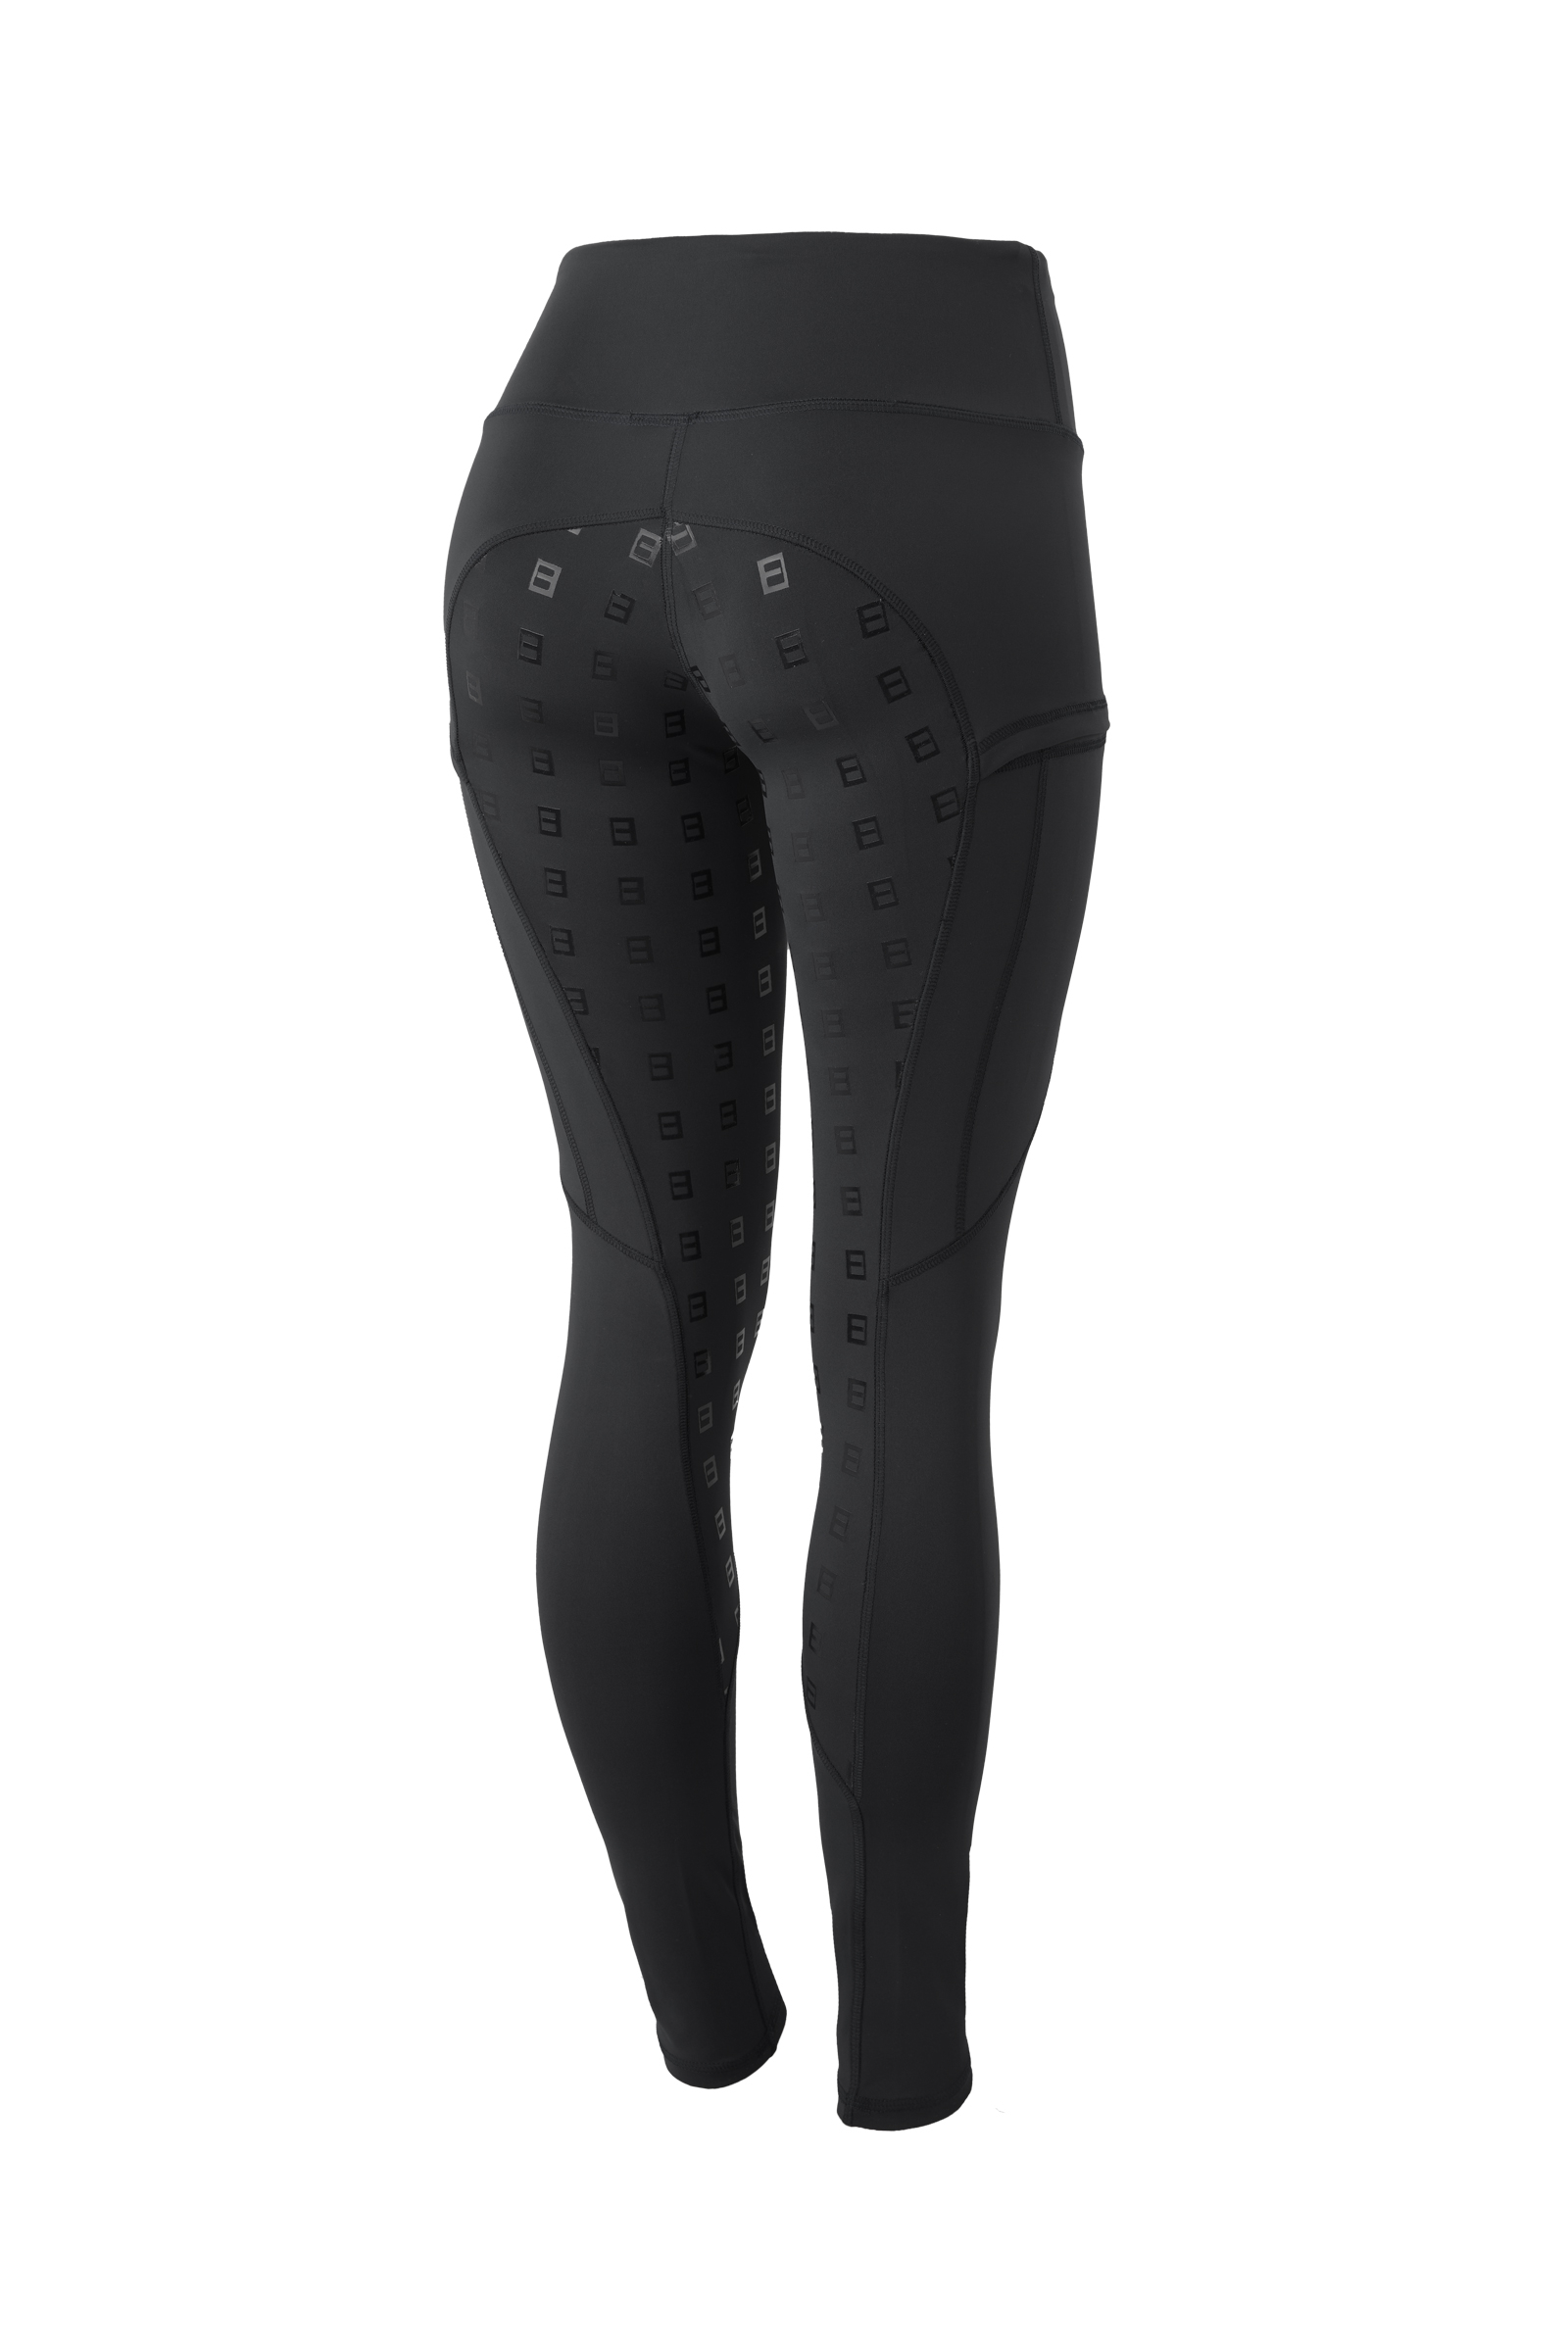 Horze Active Women's Winter Silicone Full seat Tights